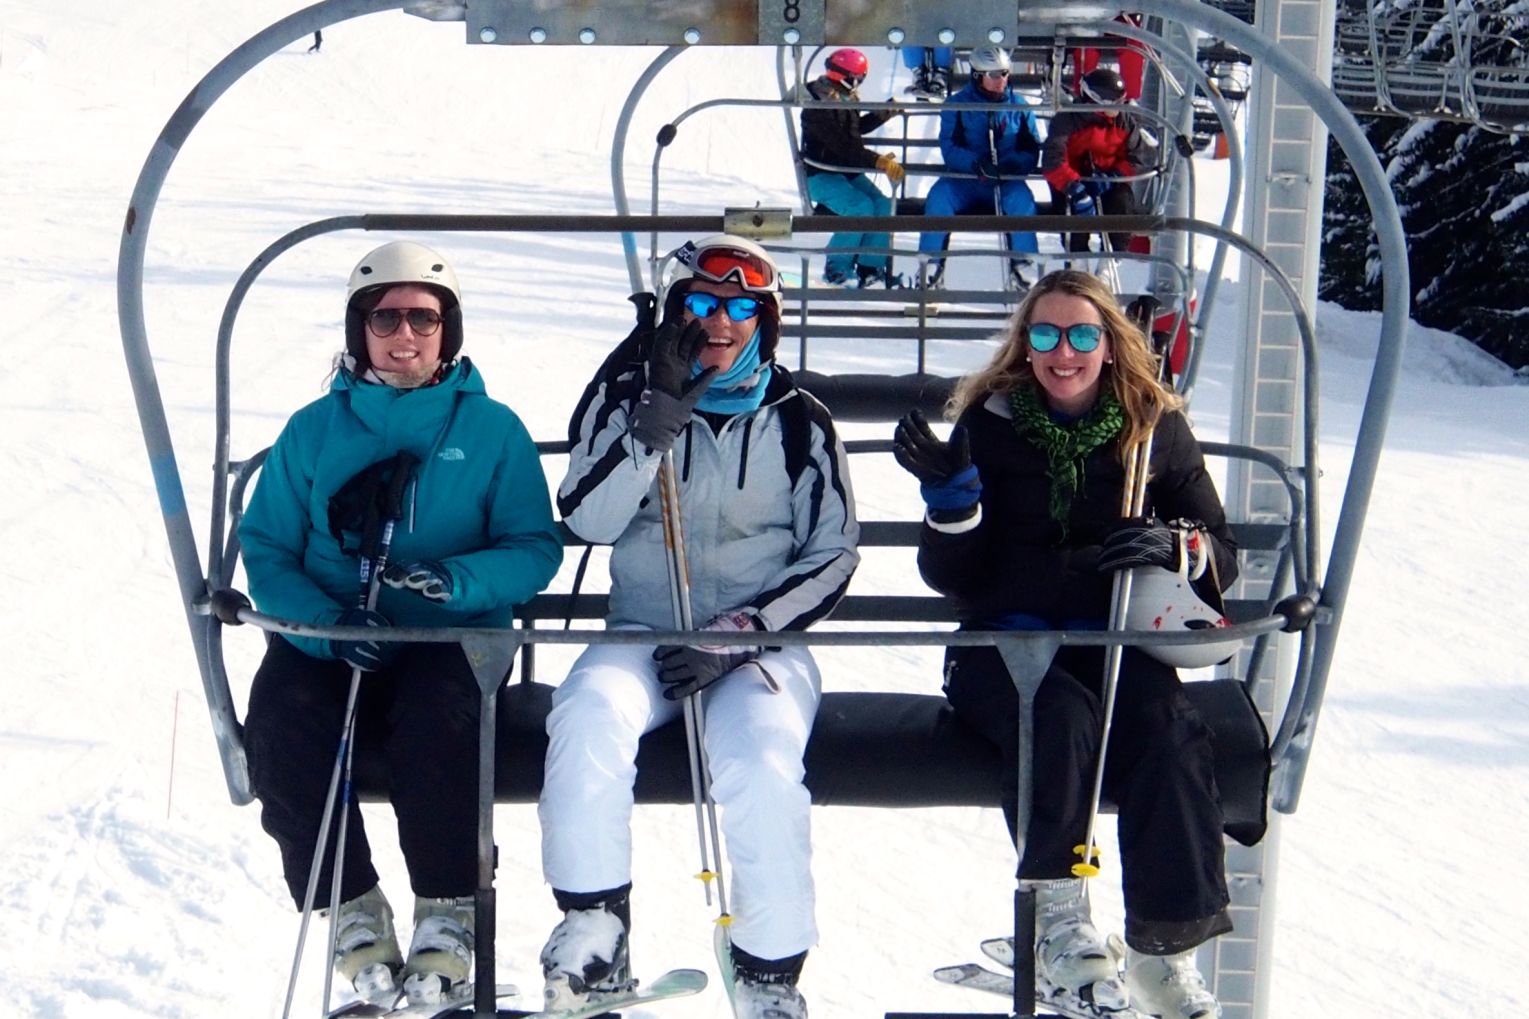 Small group of skiers on a chairlift